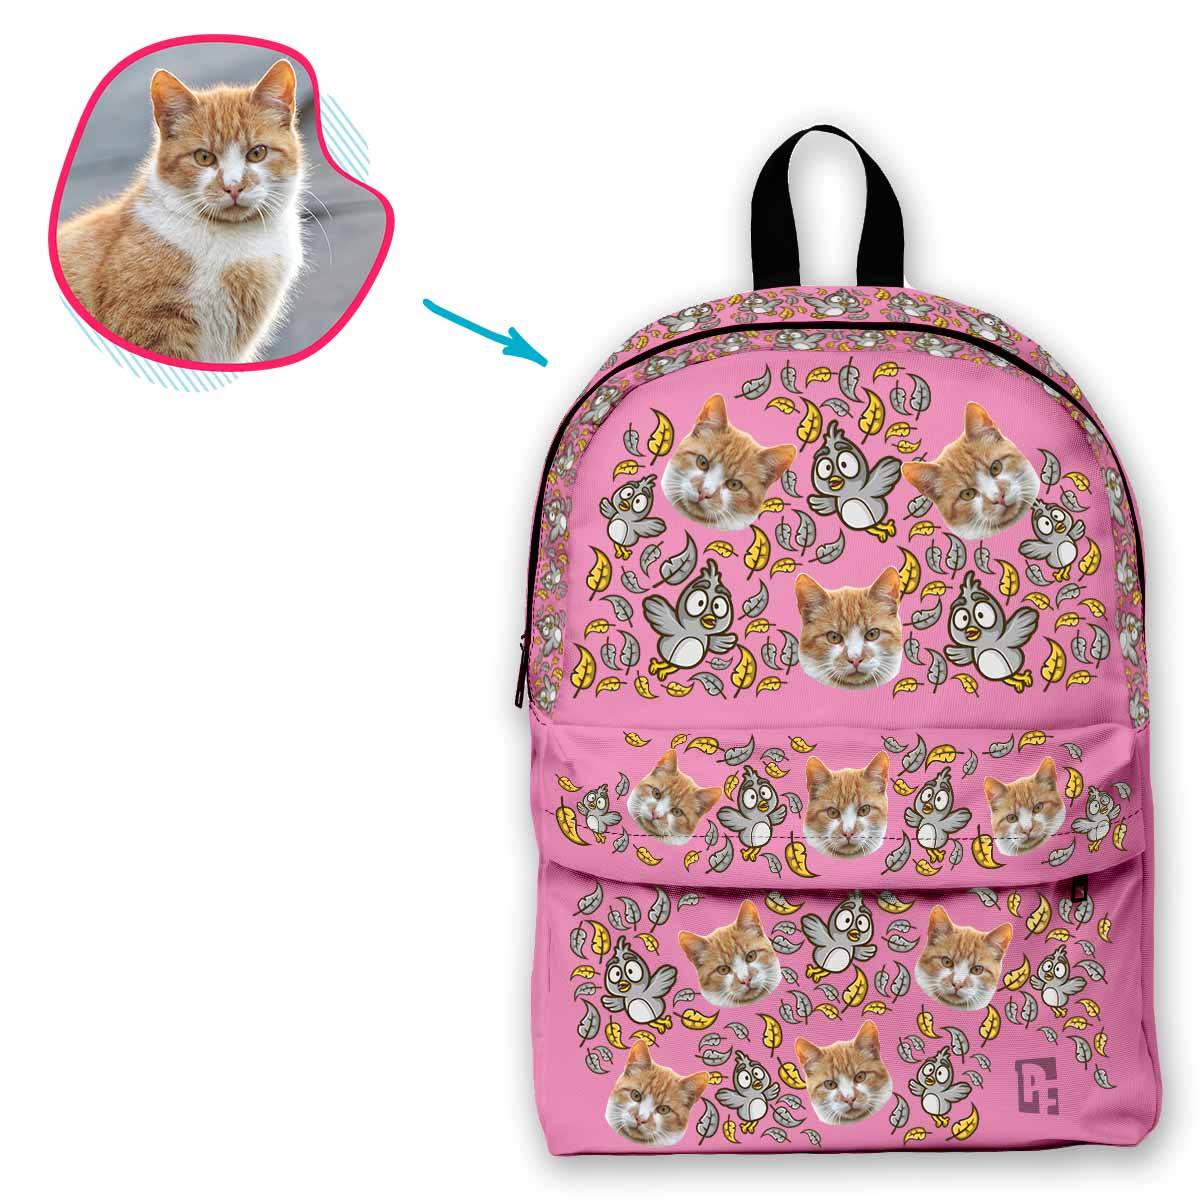 pink Bird classic backpack personalized with photo of face printed on it